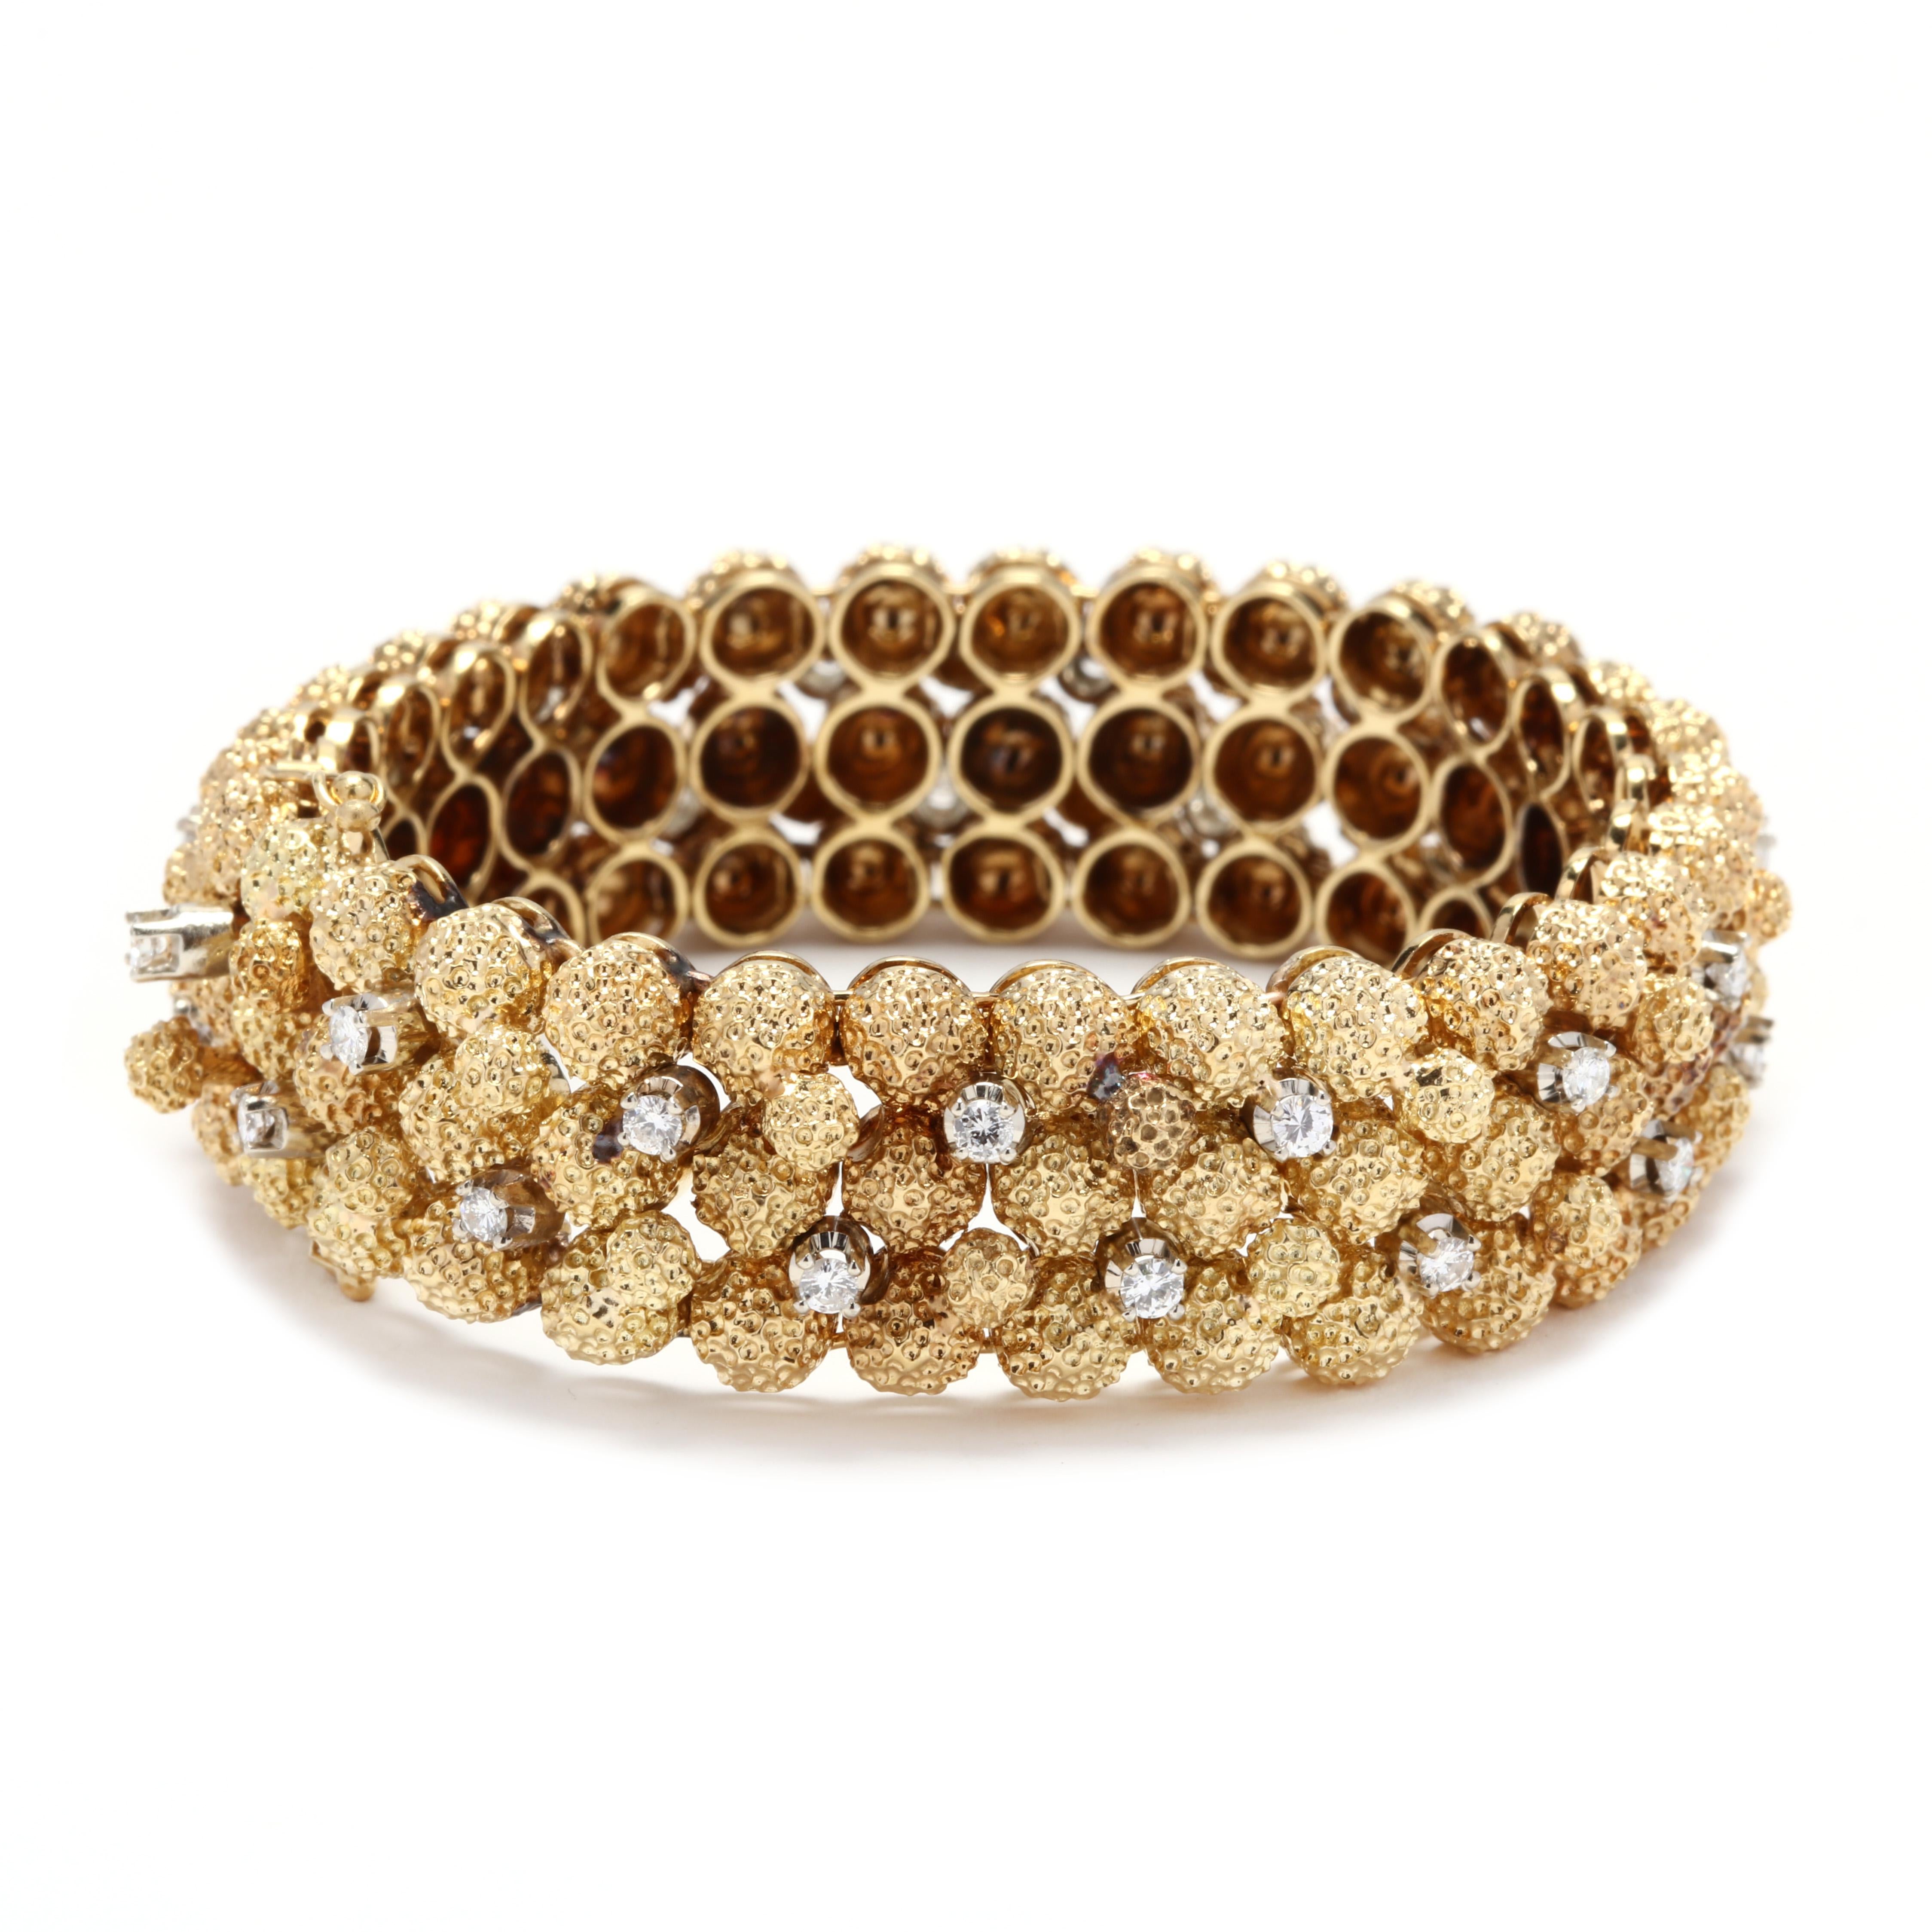 A vintage 18 karat yellow gold and diamond bracelet. This bracelet features stippled, dome links with prong set, round full cut diamond accents weighing approximately 1.3 total carats and a box clasp. This is your statement bracelet!

Stones:
-